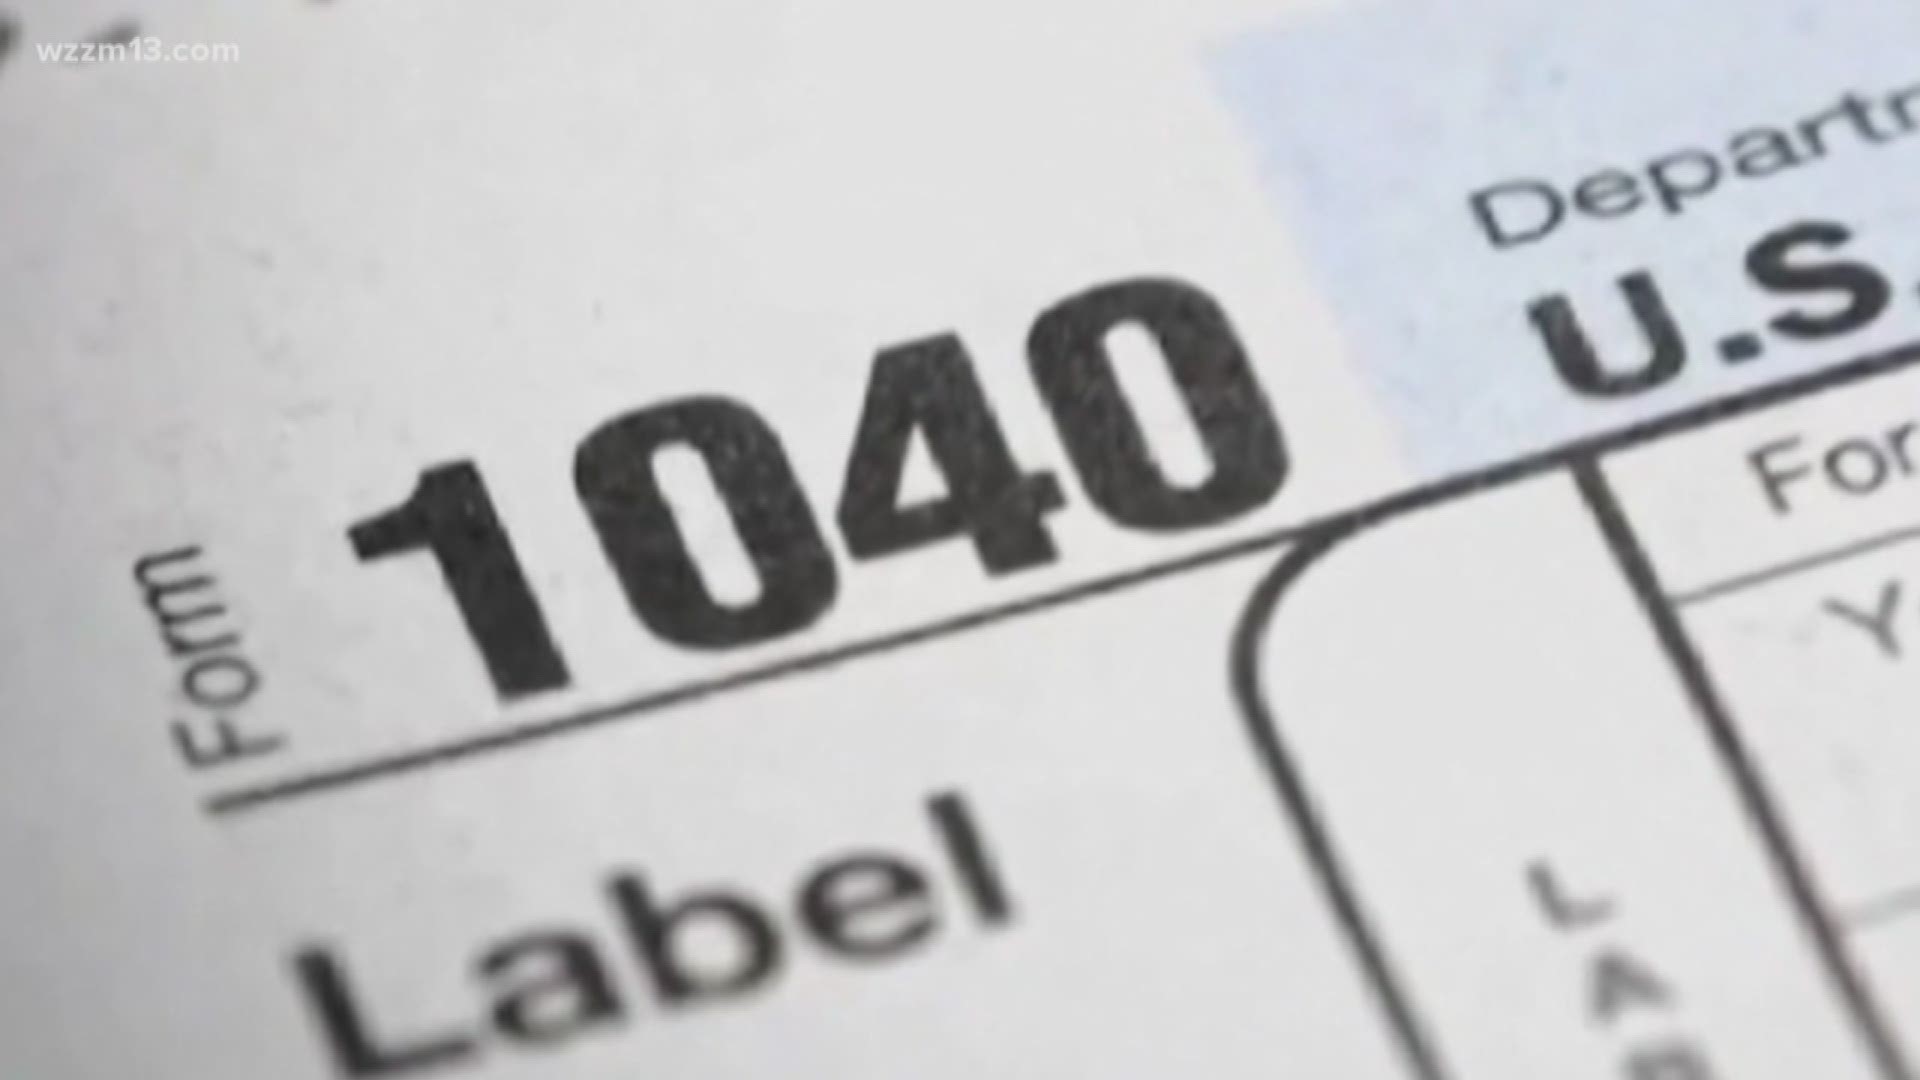 Tips on what you should do if you own taxes this year from Chris Harper, an Instructor at Grand Valley State University and Senior Manager with Hungerford Nichols.